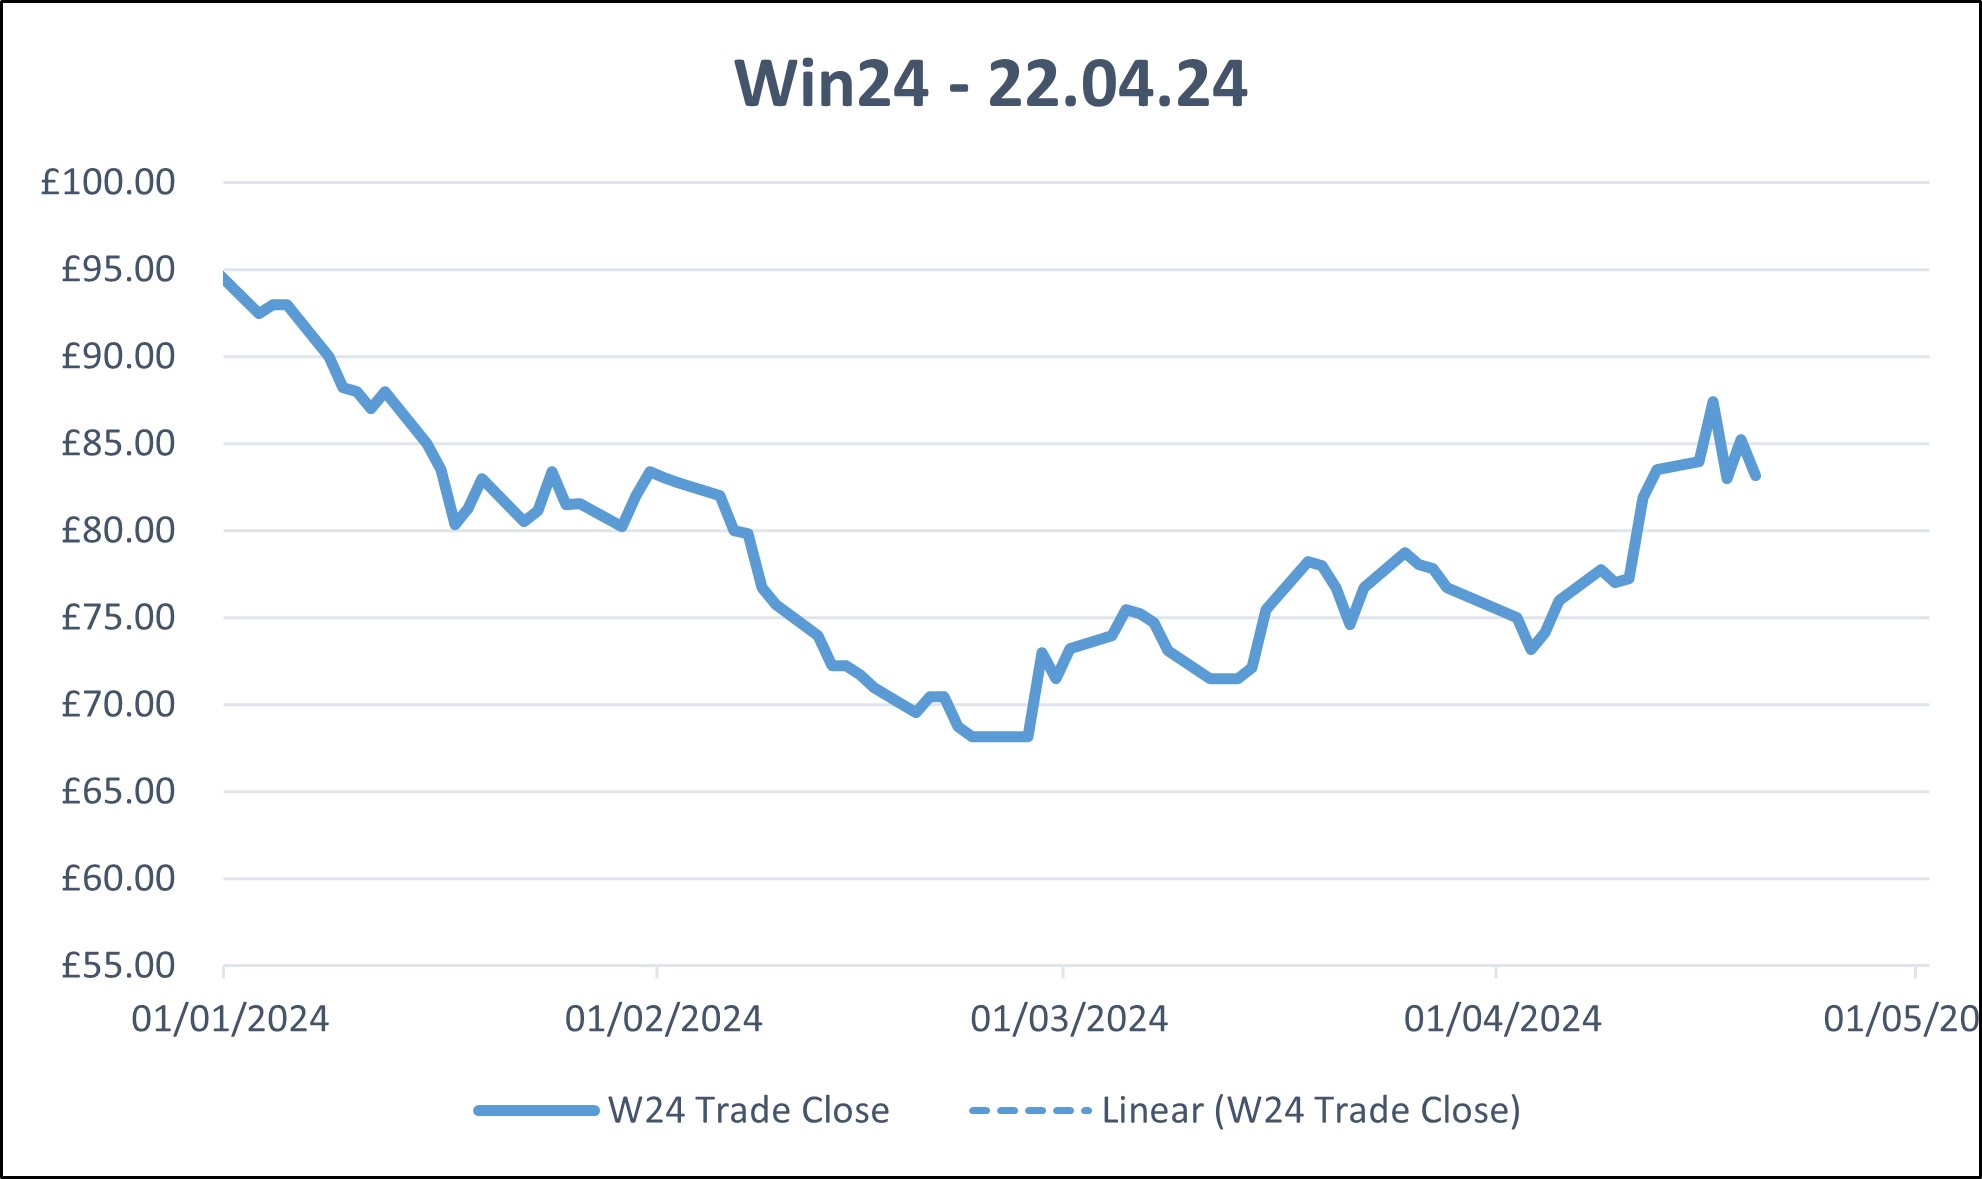 win24 wholesale electricity price chart 22.04.24